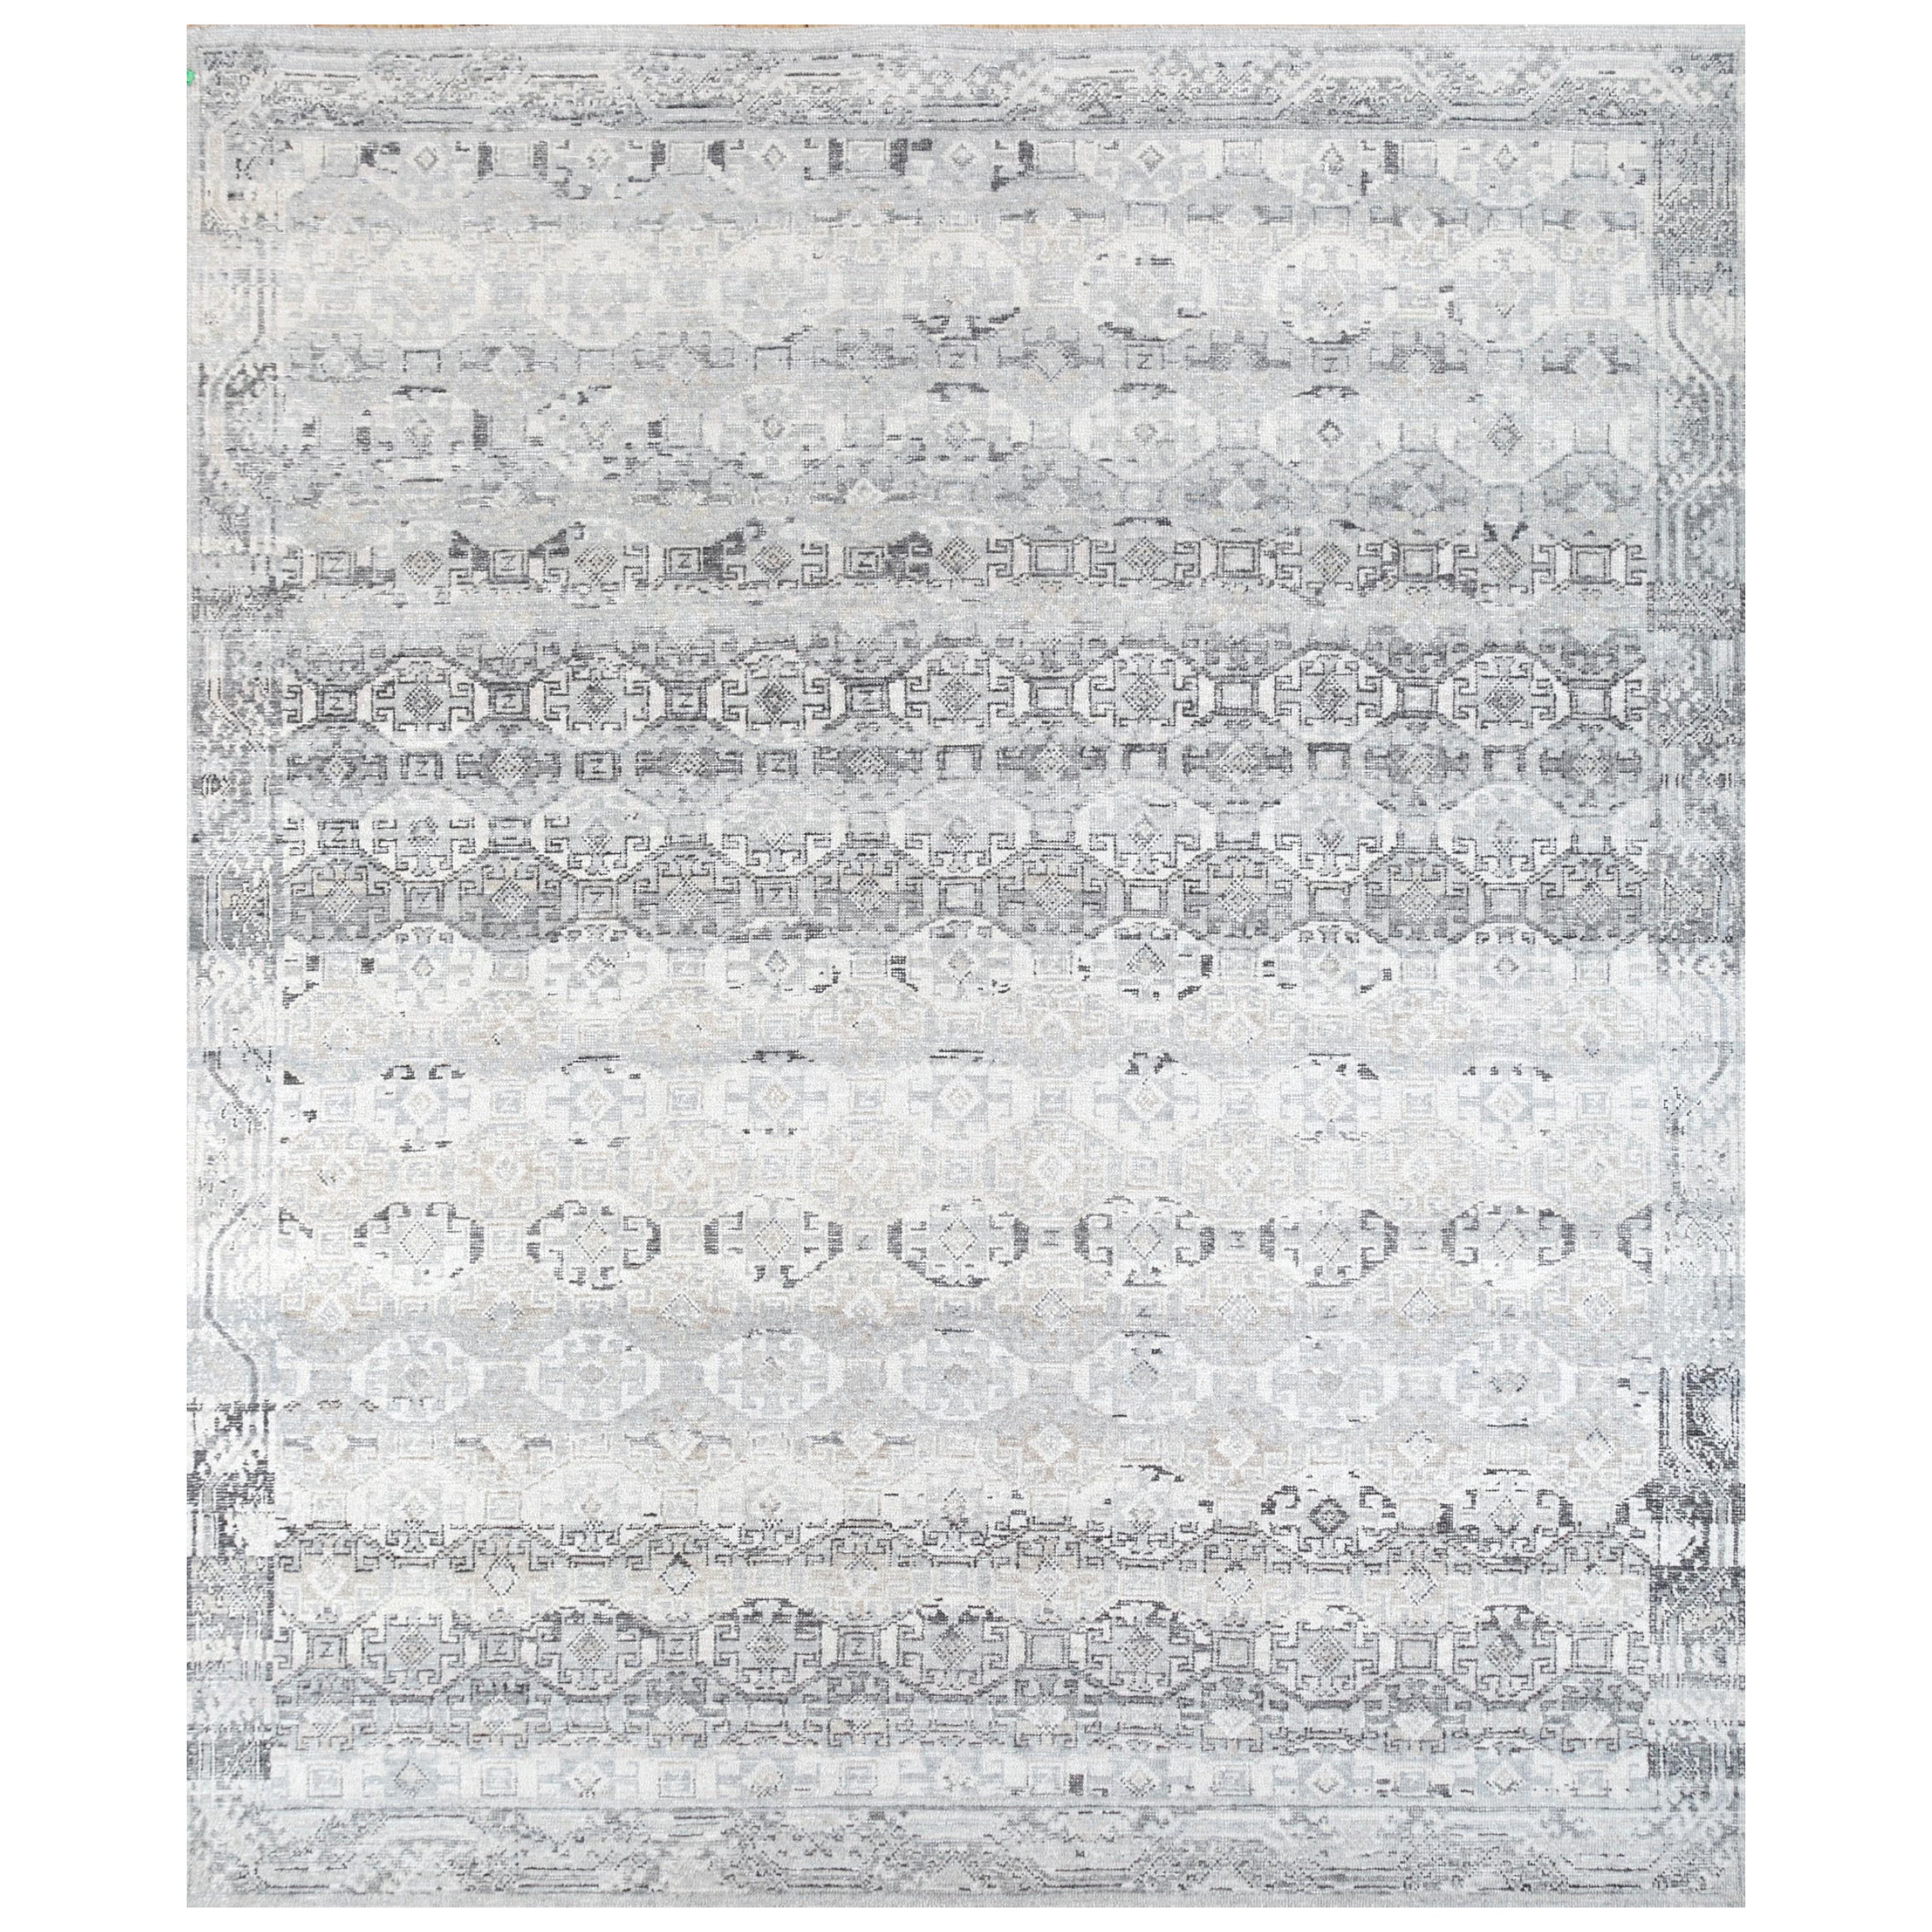 Whispers of Sand Dunes Medium taupe White 180X270 cm Handknotted rug